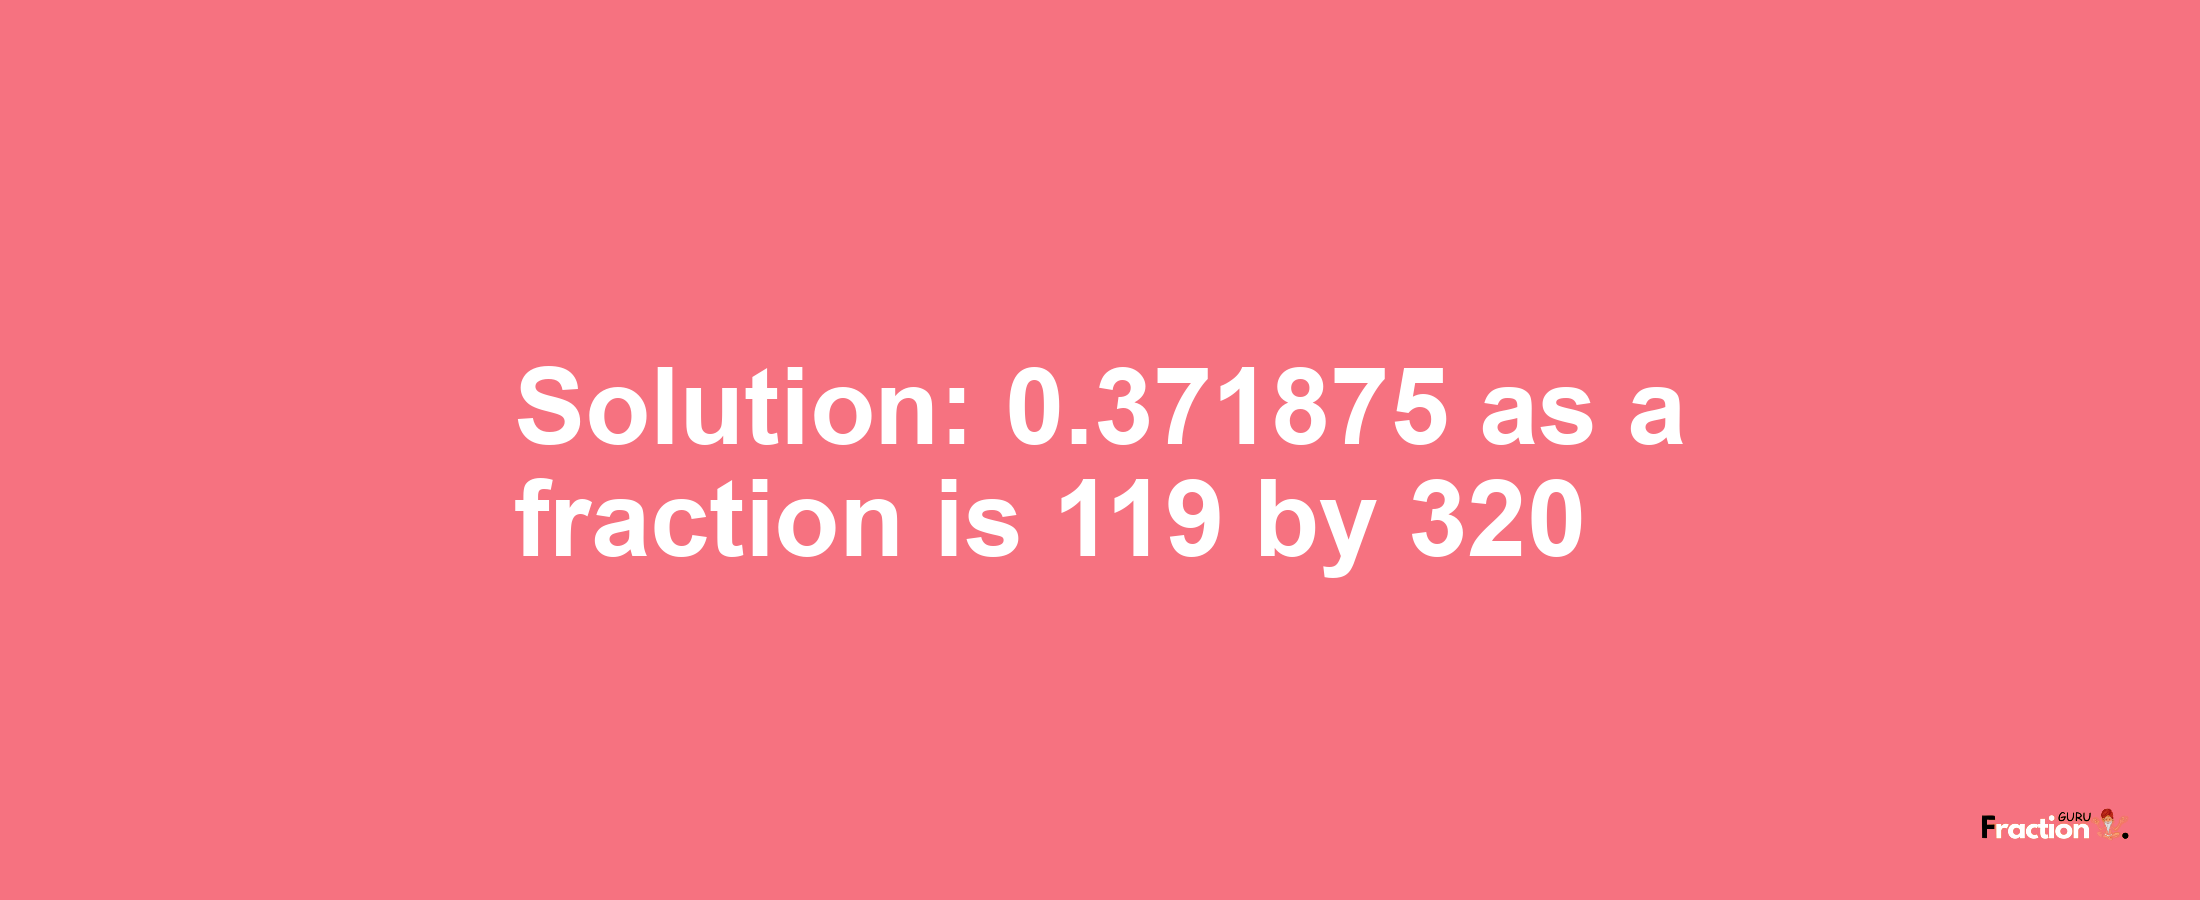 Solution:0.371875 as a fraction is 119/320